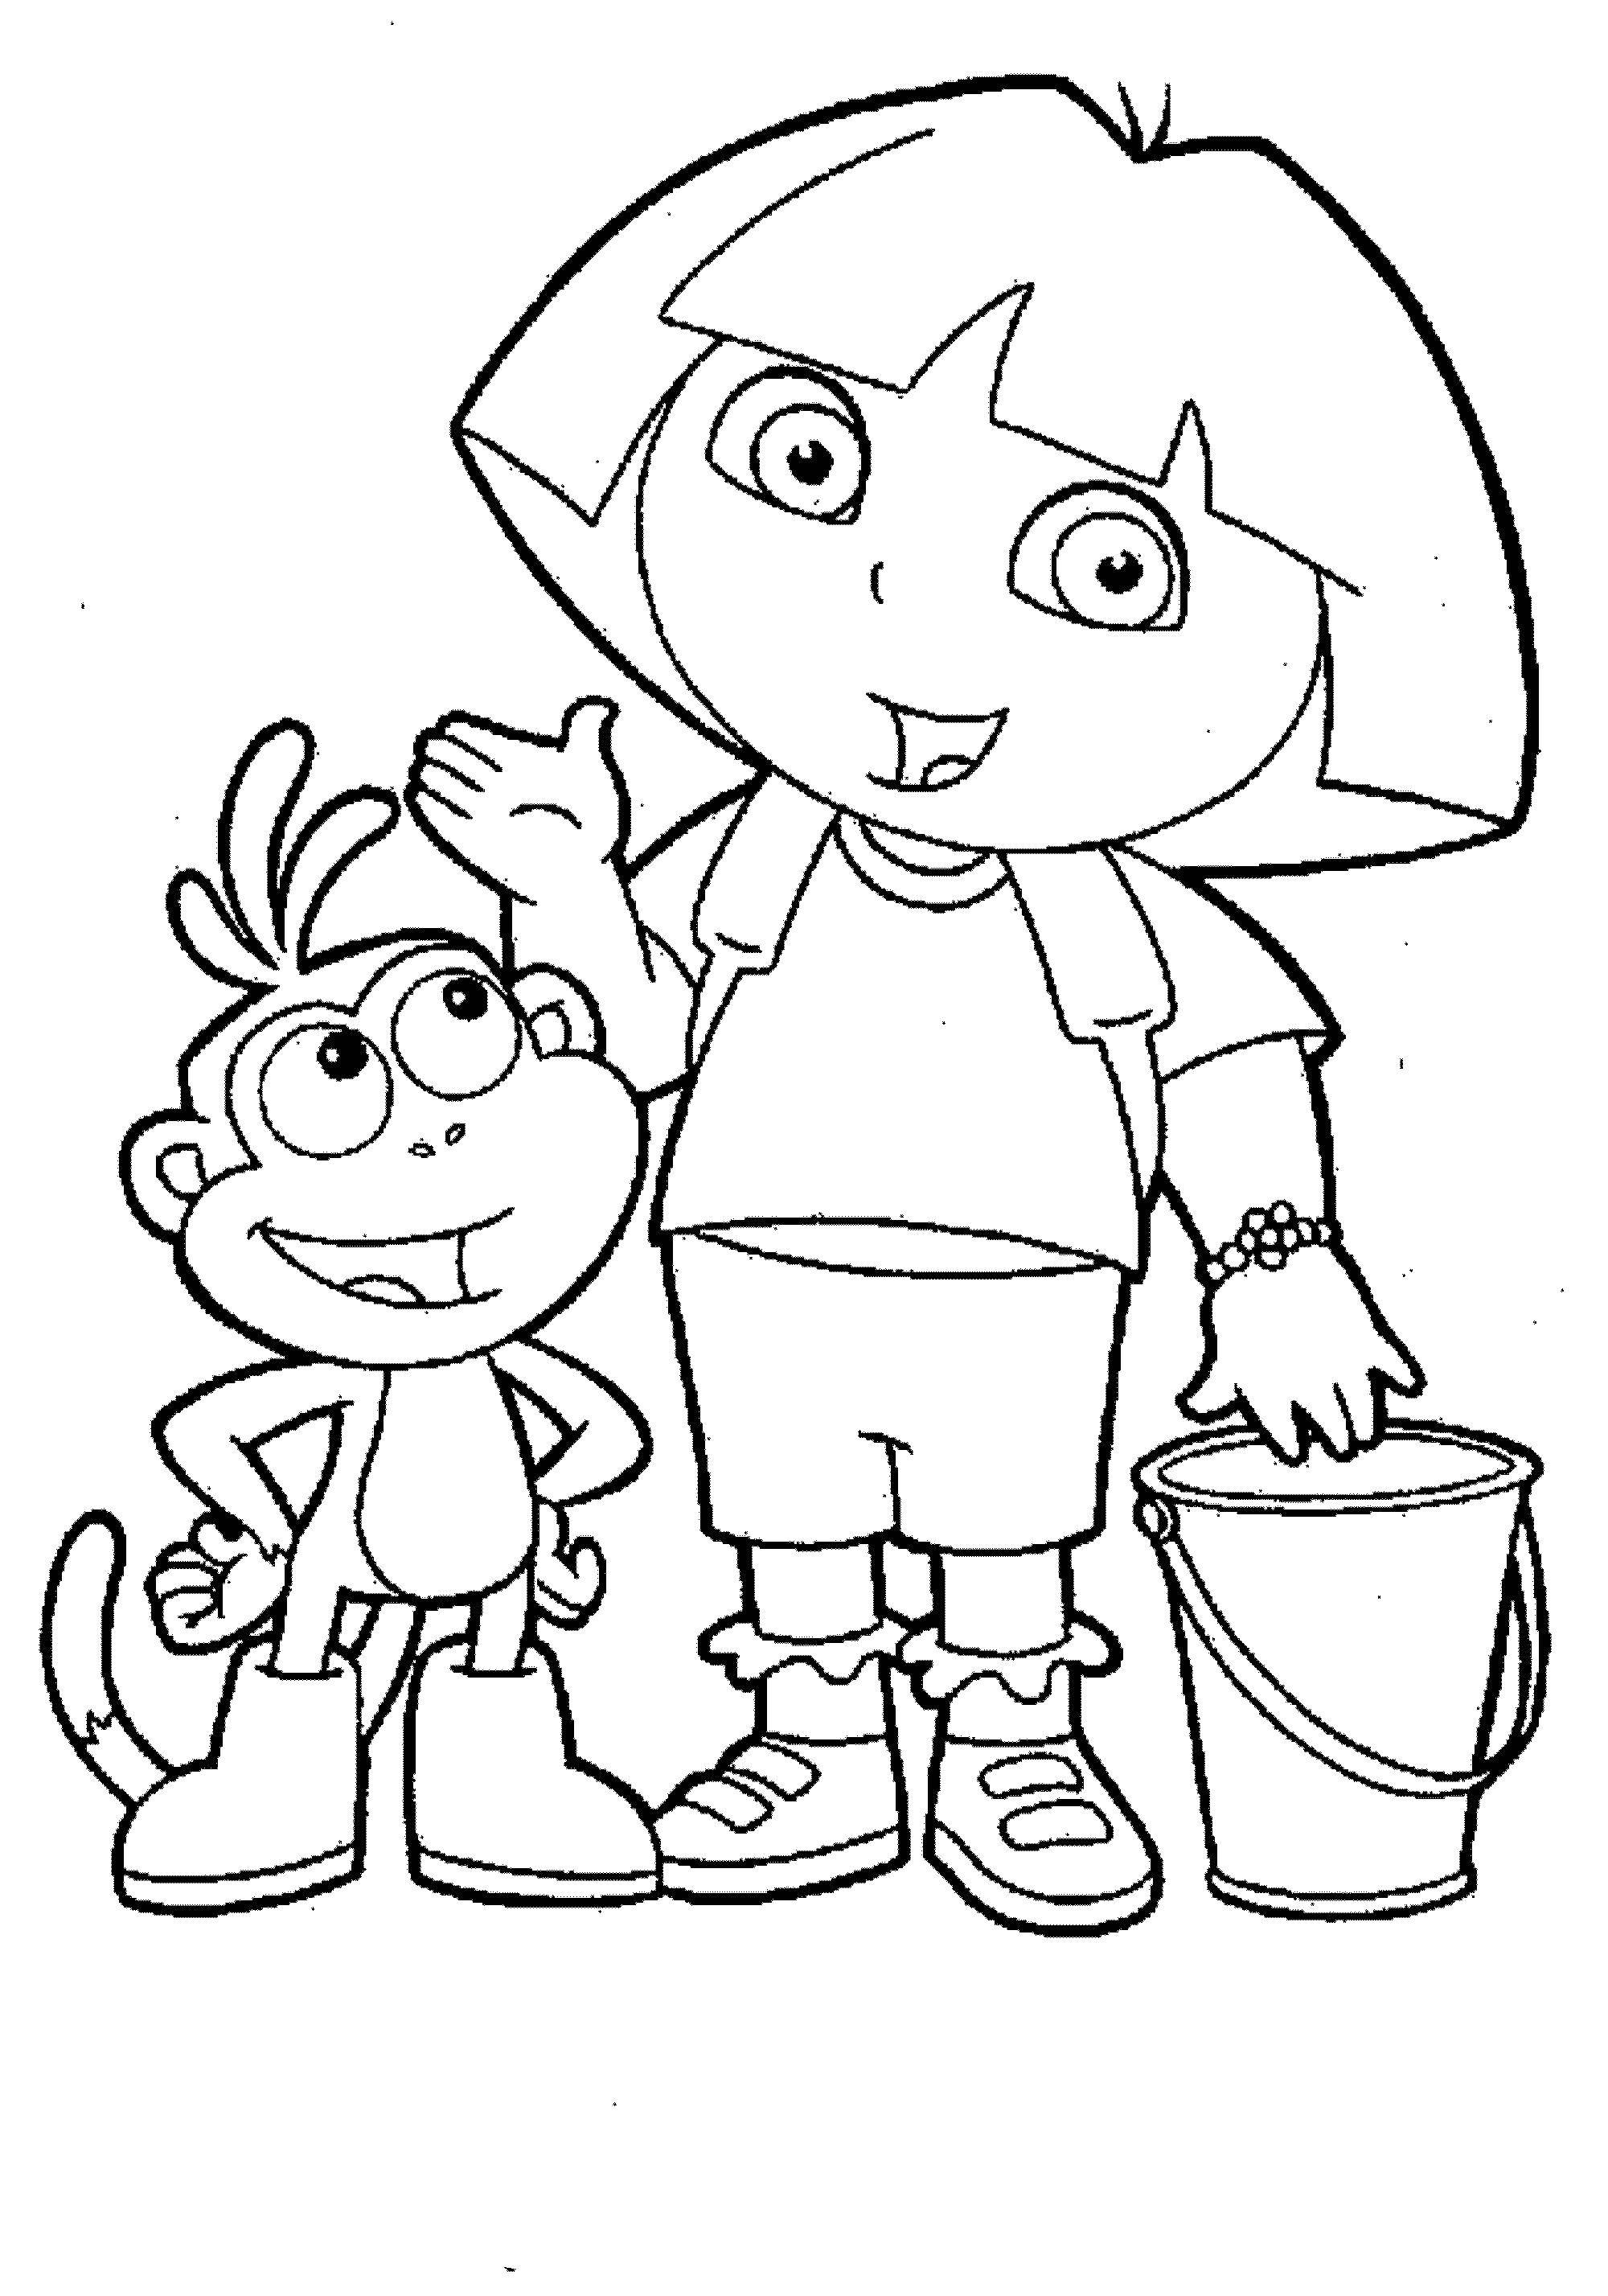 Coloring Dasha and slipper with a bucket. Category Dora. Tags:  Dasha traveler, slipper.